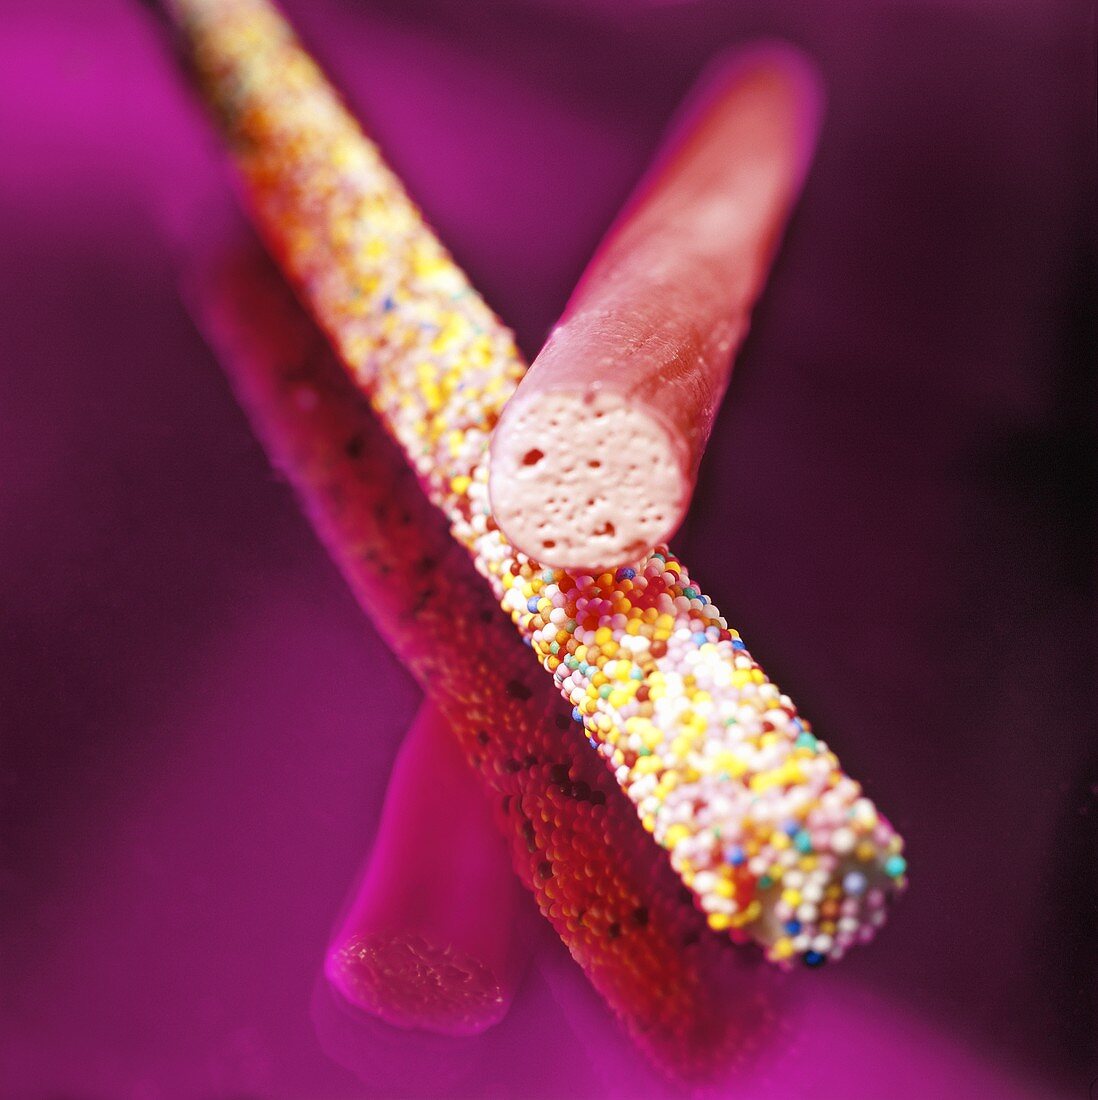 Two sticks of rock (Coloured confectionery sticks, UK)